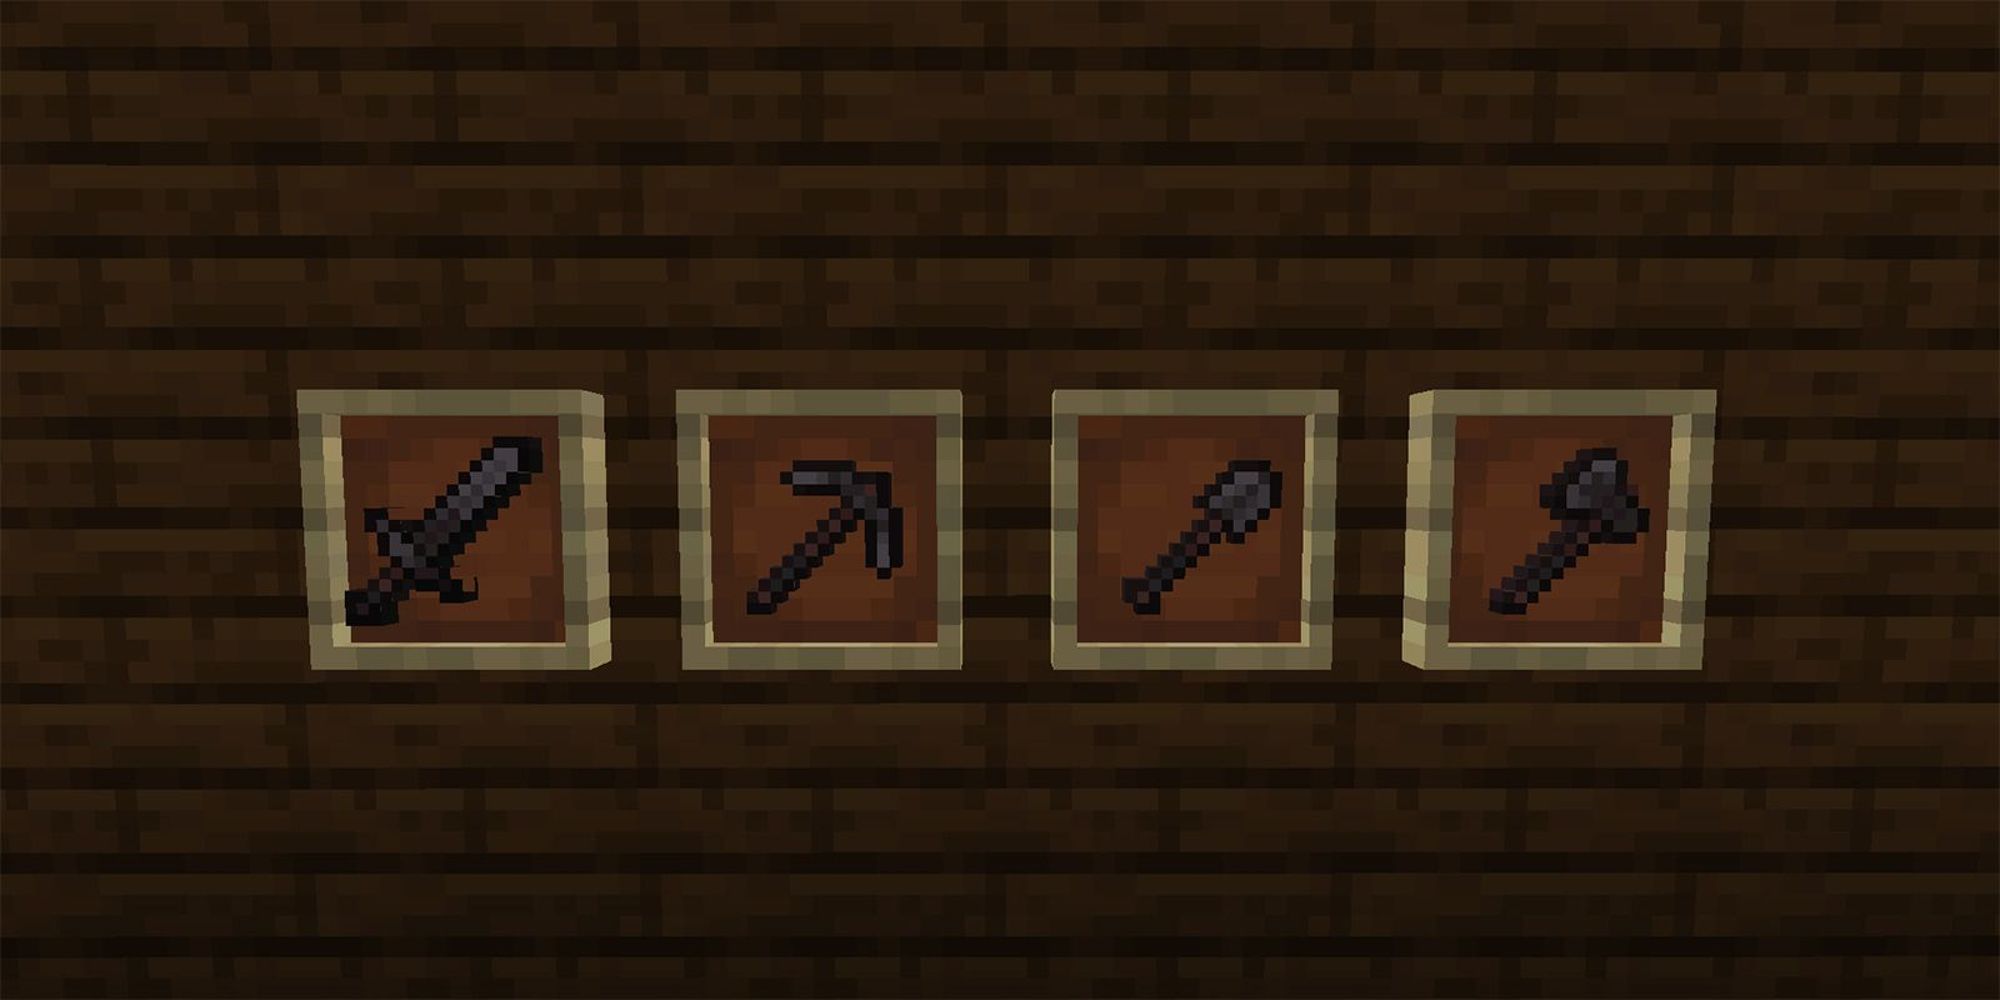 netherite tools in wall frames